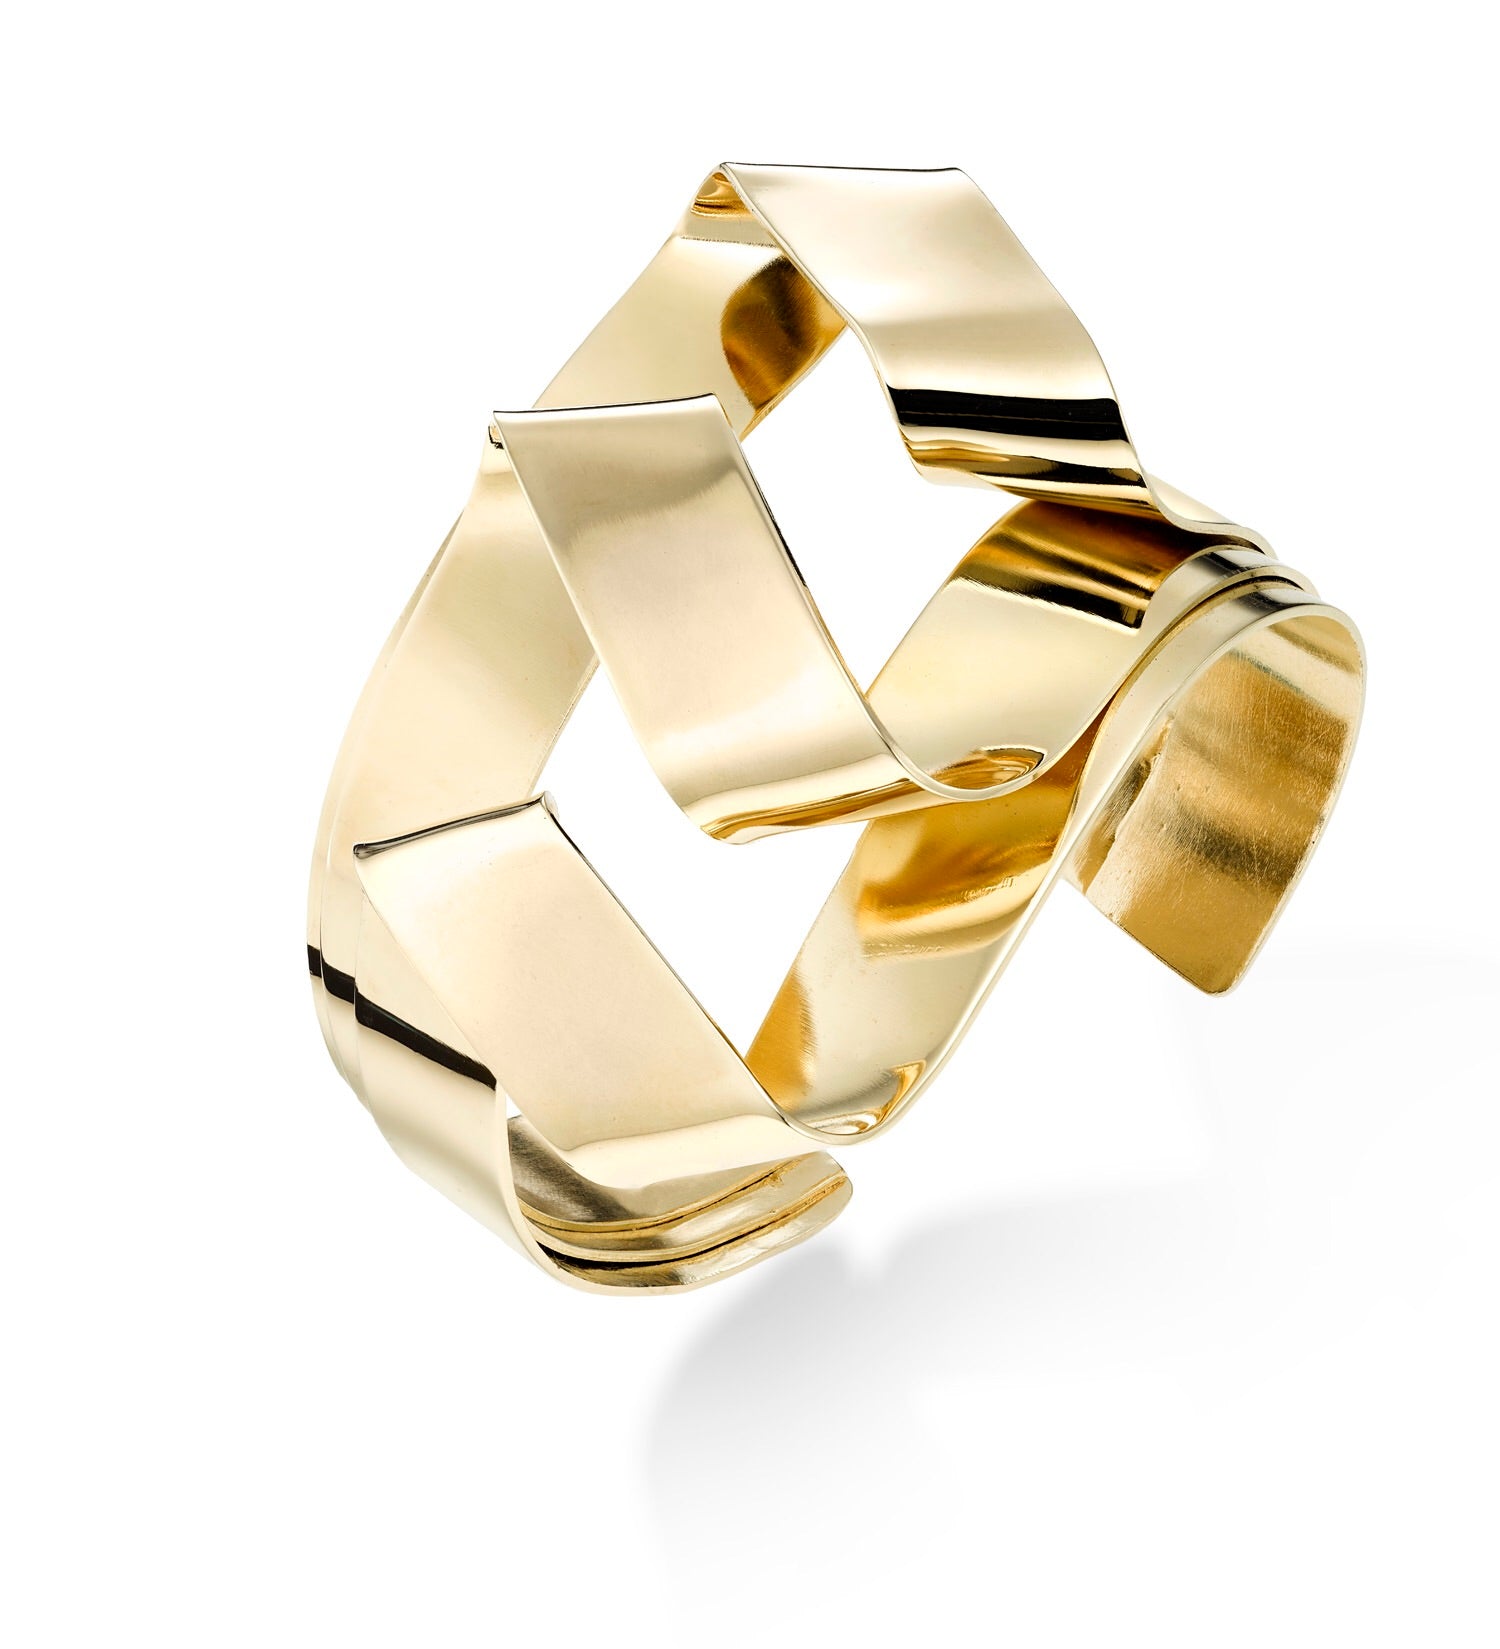 Bold deco inspired cuff bracelet. It's a statement piece a bit more architectural than the other sinuous Oblik Atelier pieces   ~ 1.75-2” wide approximately as each piece is hand made.  Hand fabricated in brass and finished in 14k nickel free gold plating.